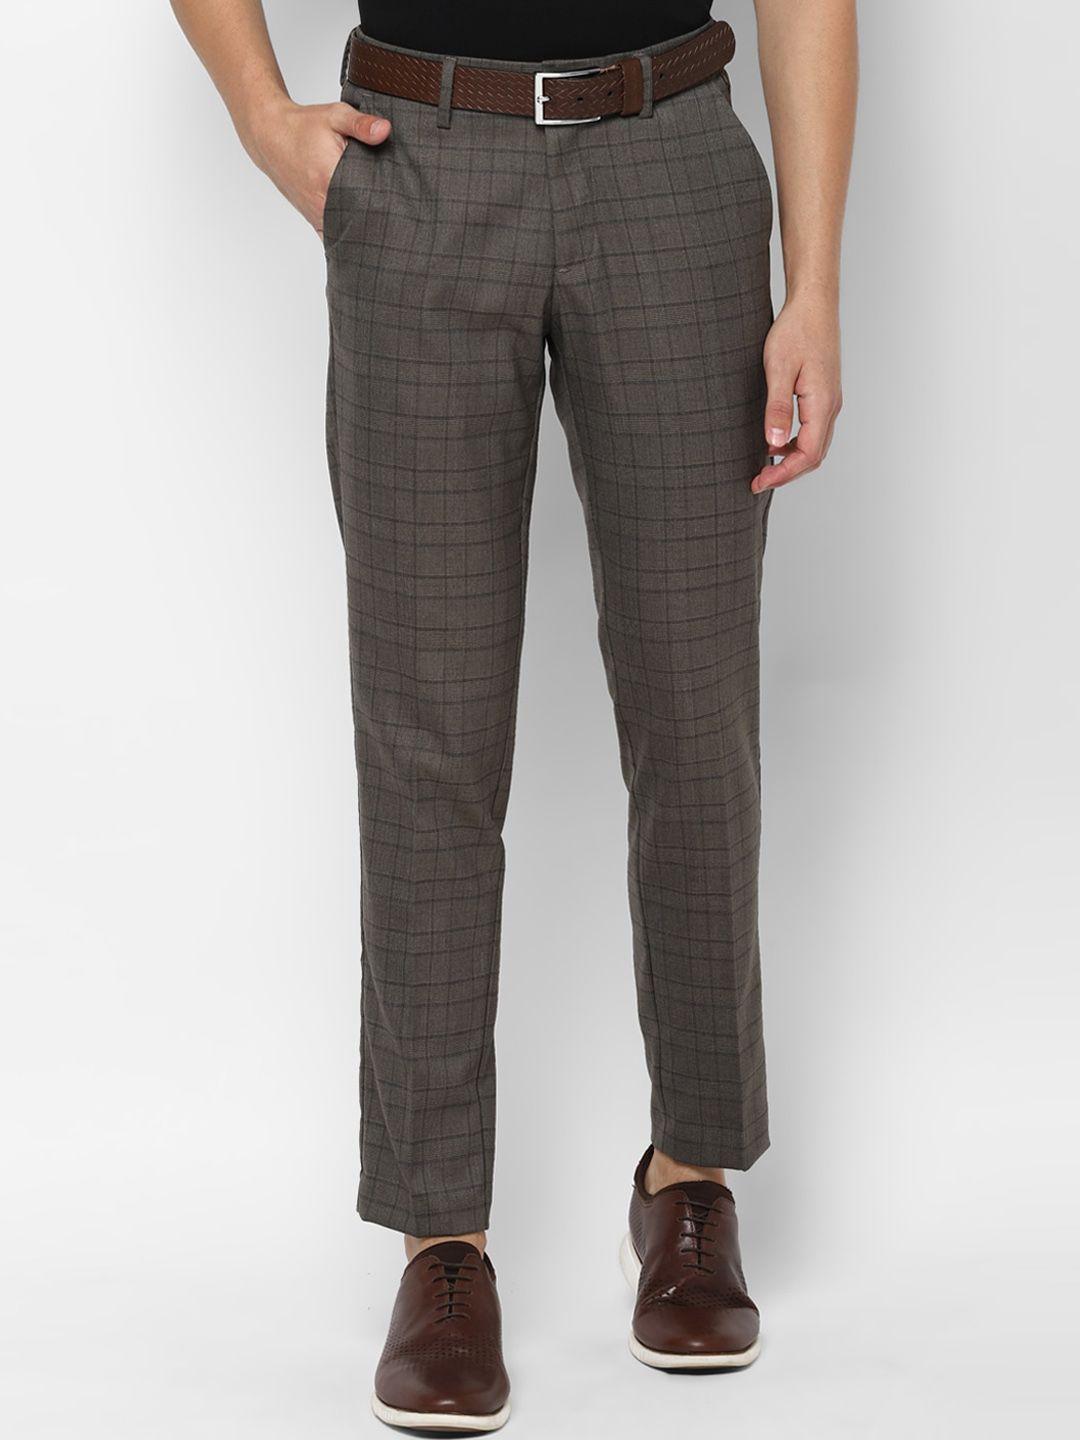 allen solly men grey checked slim fit trousers